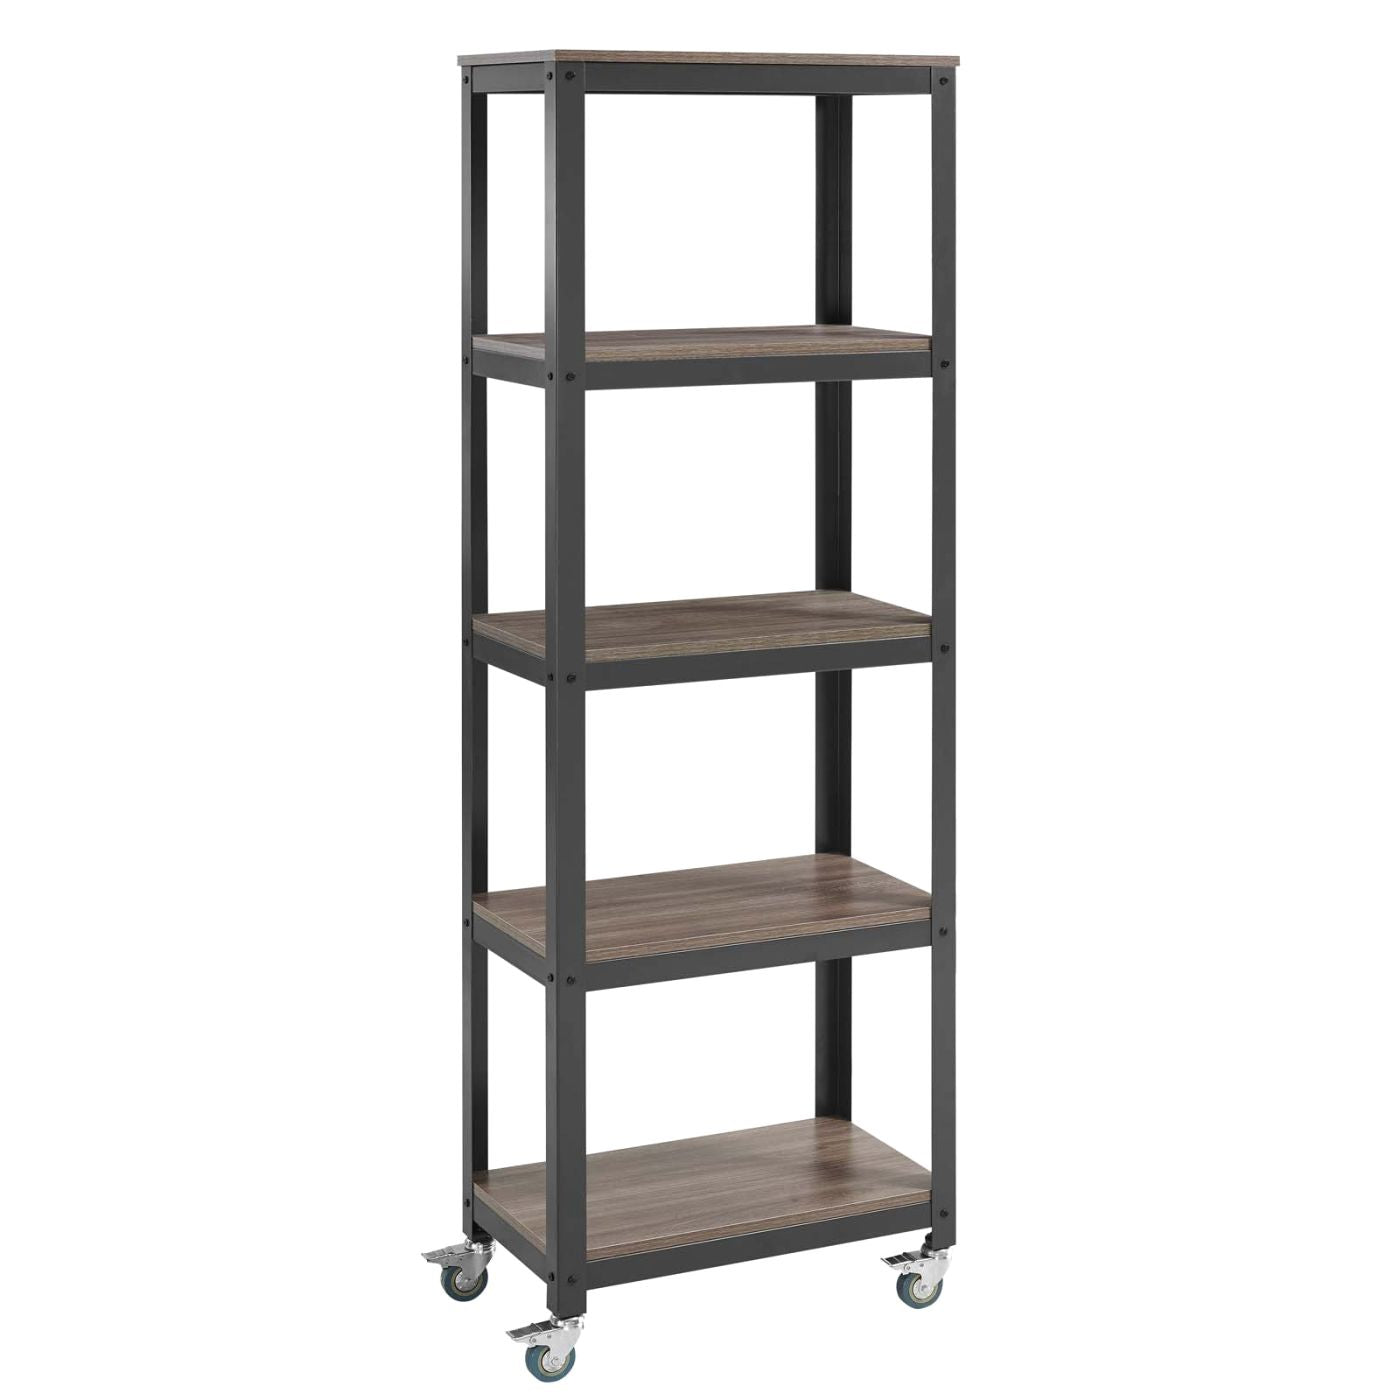 Modway Bookcases On Sale Eei 2854 Gry Wal Set Vivify